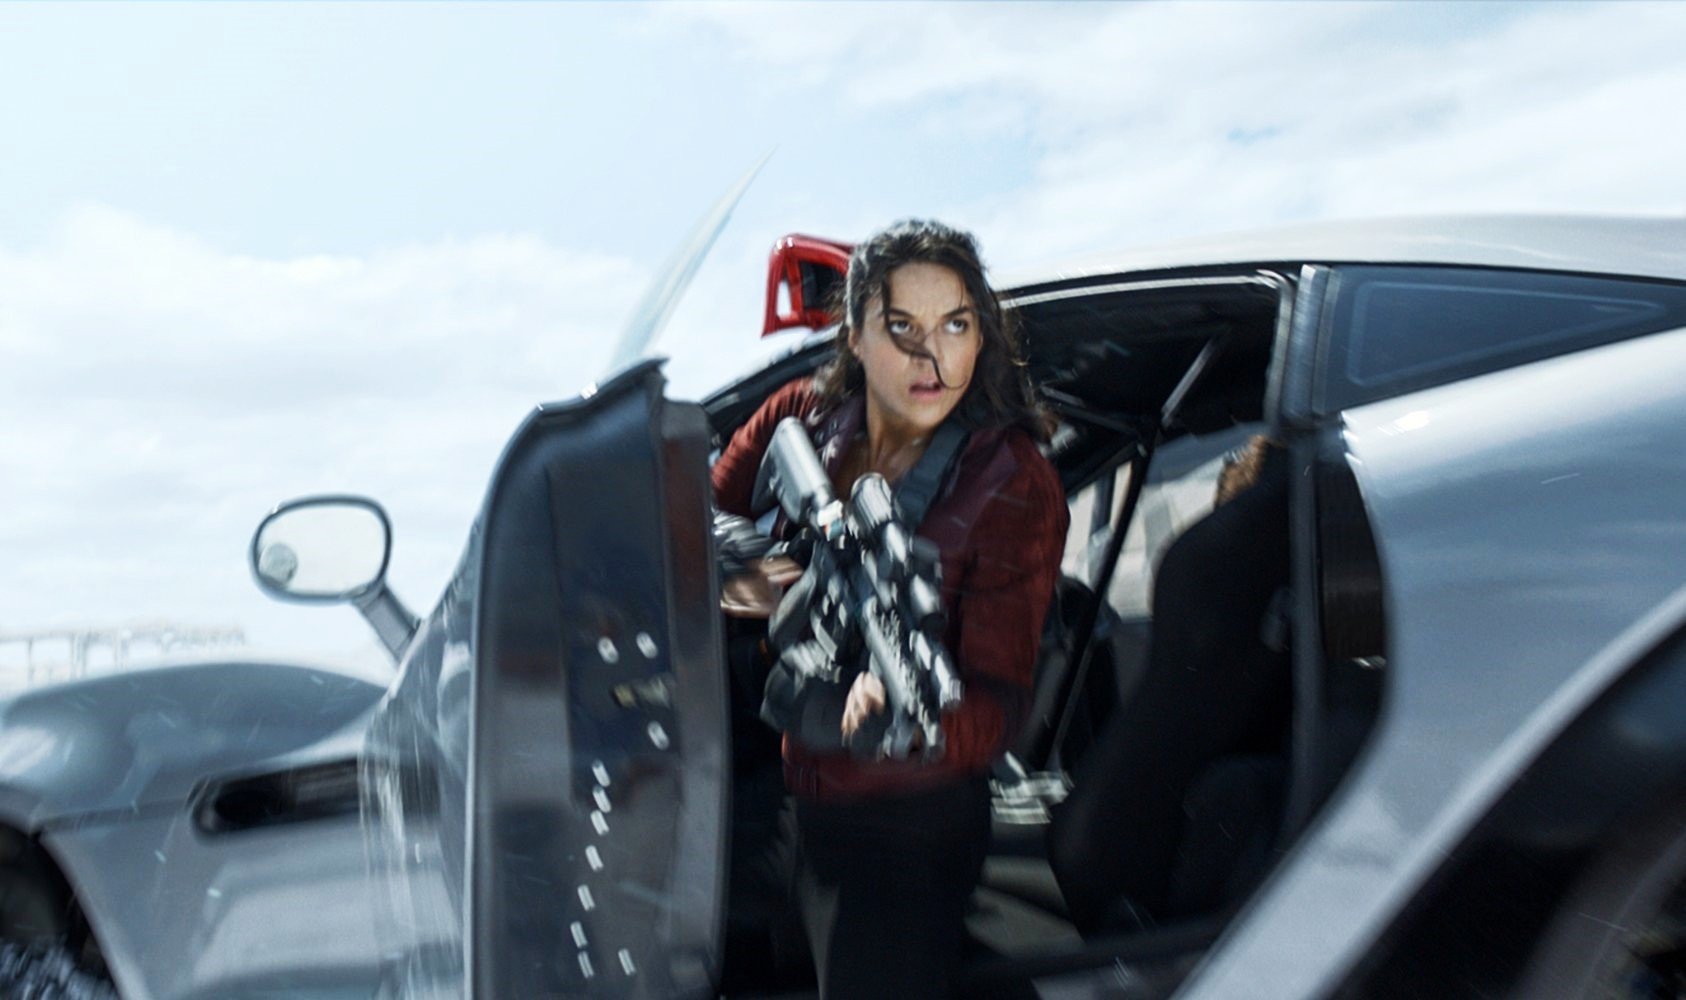 Michelle Rodriguez stars as Letty 'Ortiz' Toretto in Universal Pictures' The Fate of the Furious (2017)